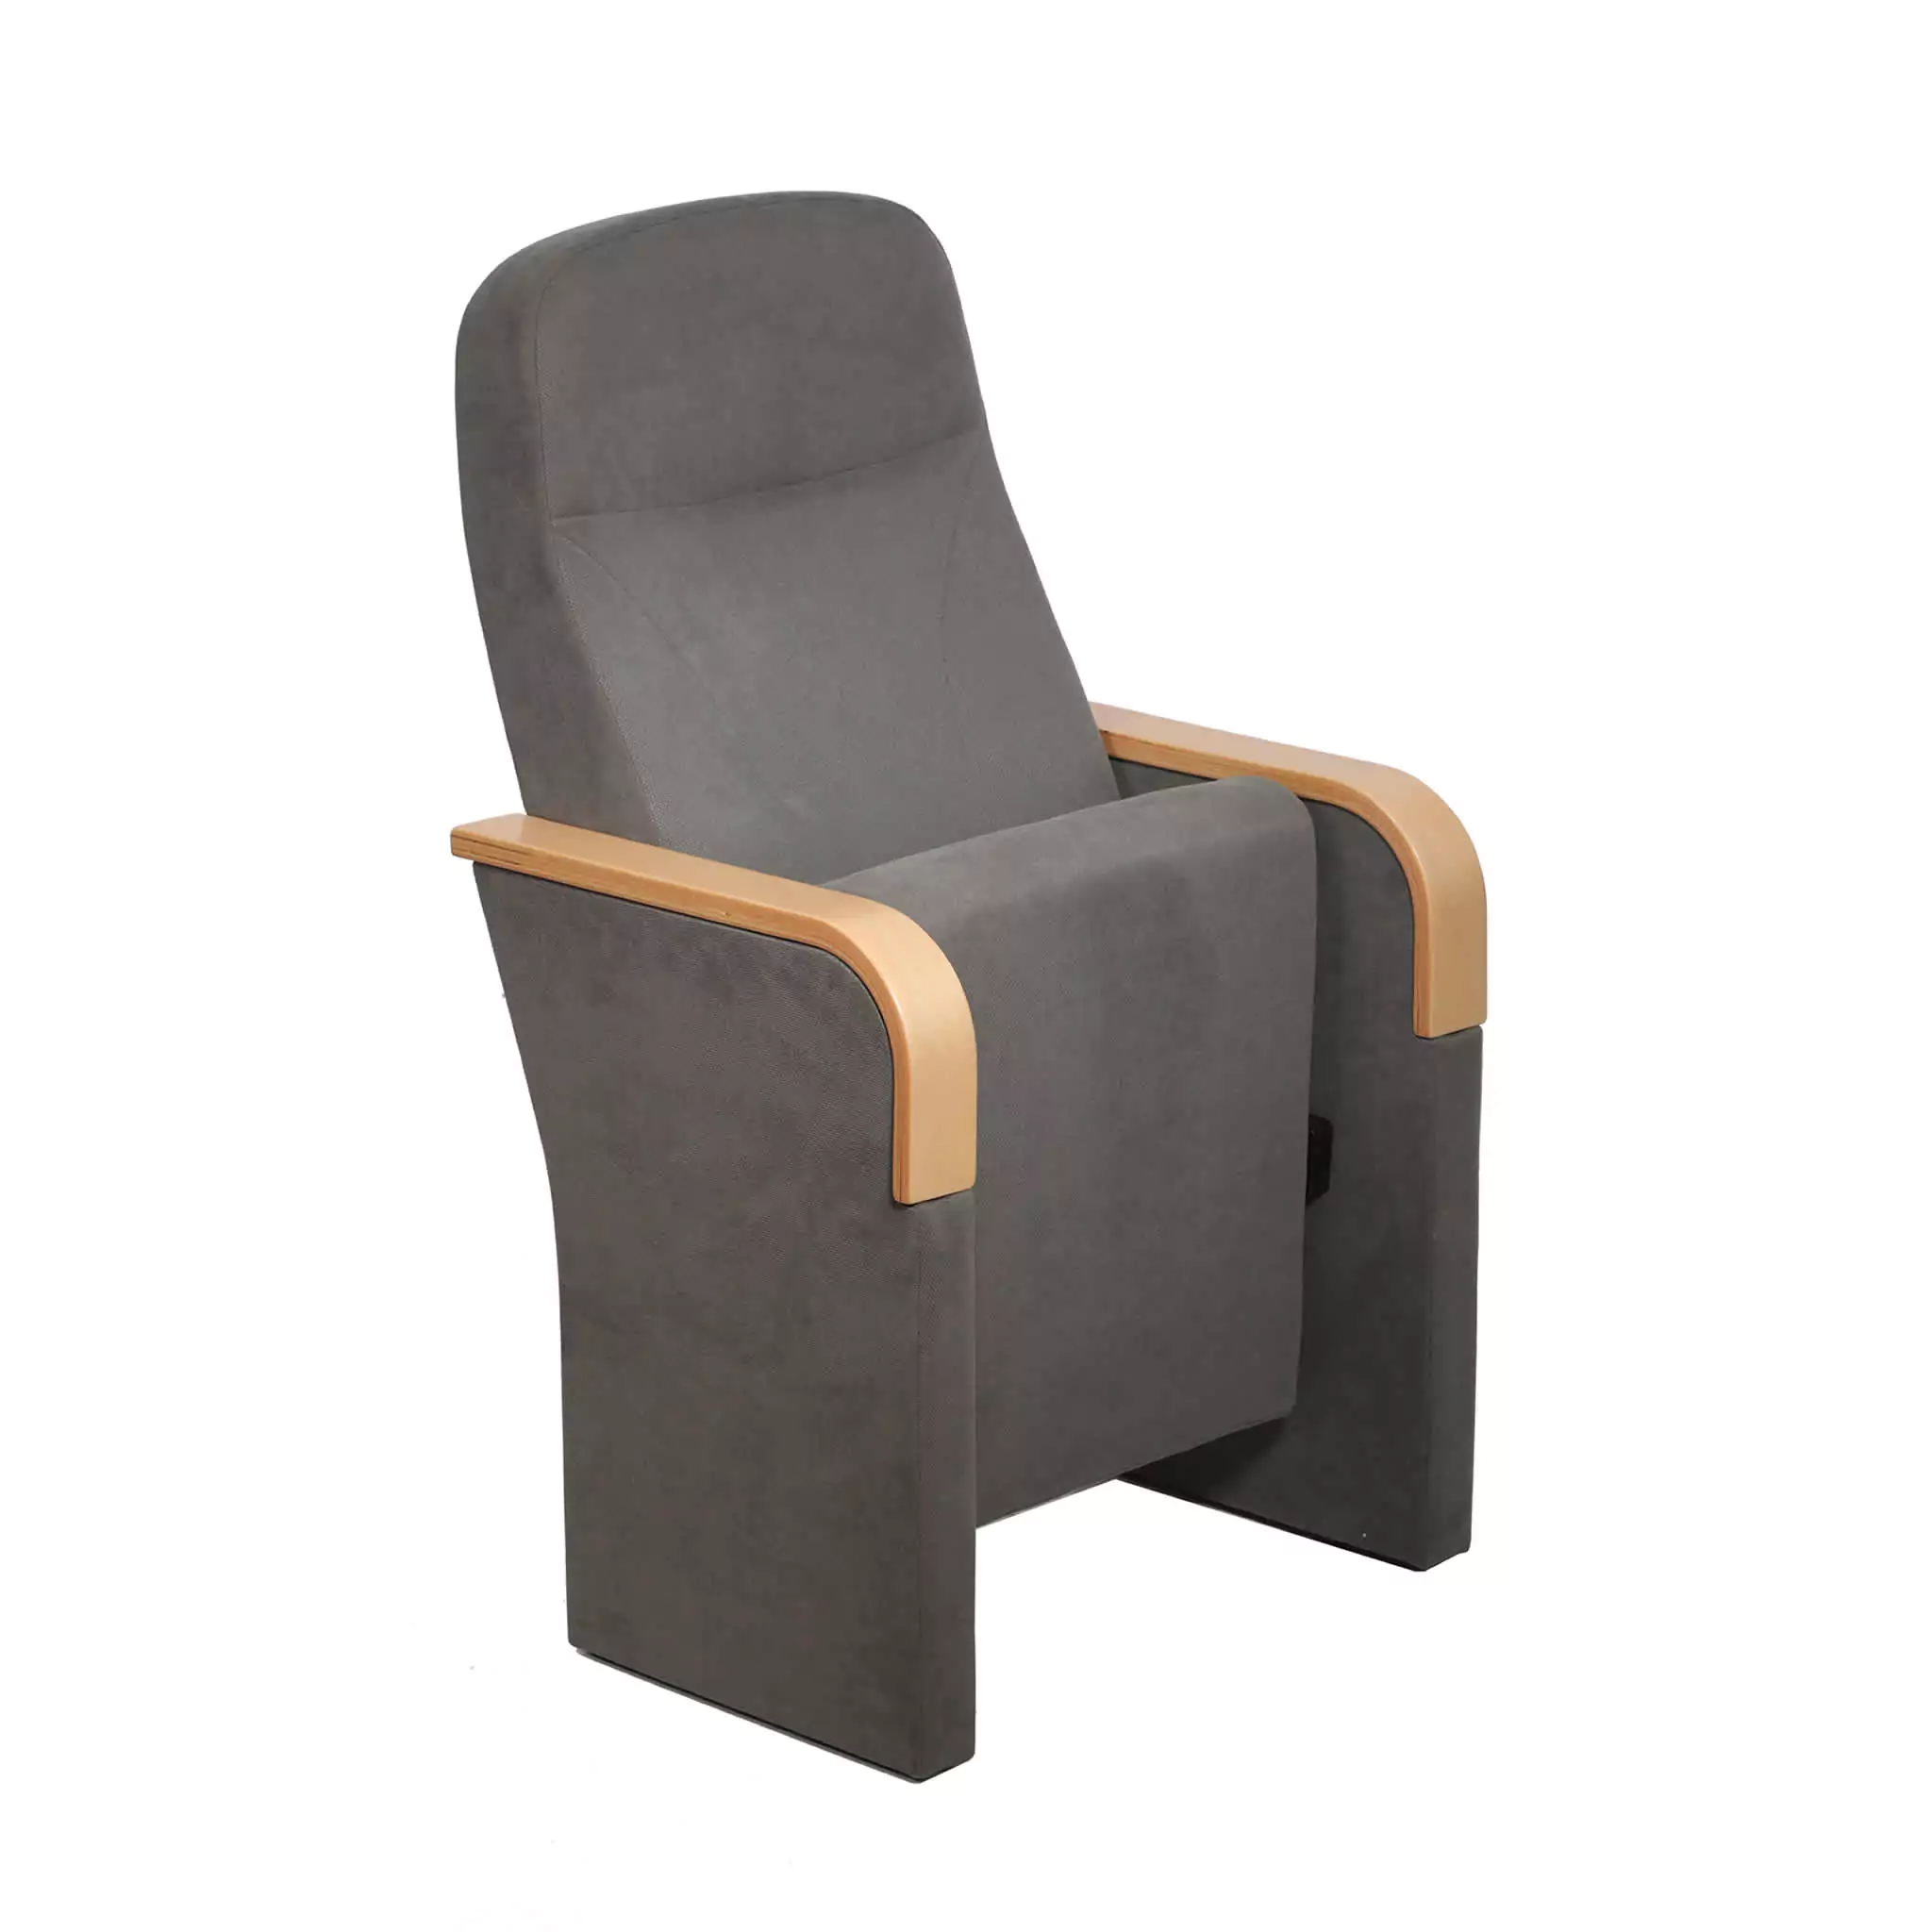 Simko Seating Product Conference Seat Suare 01